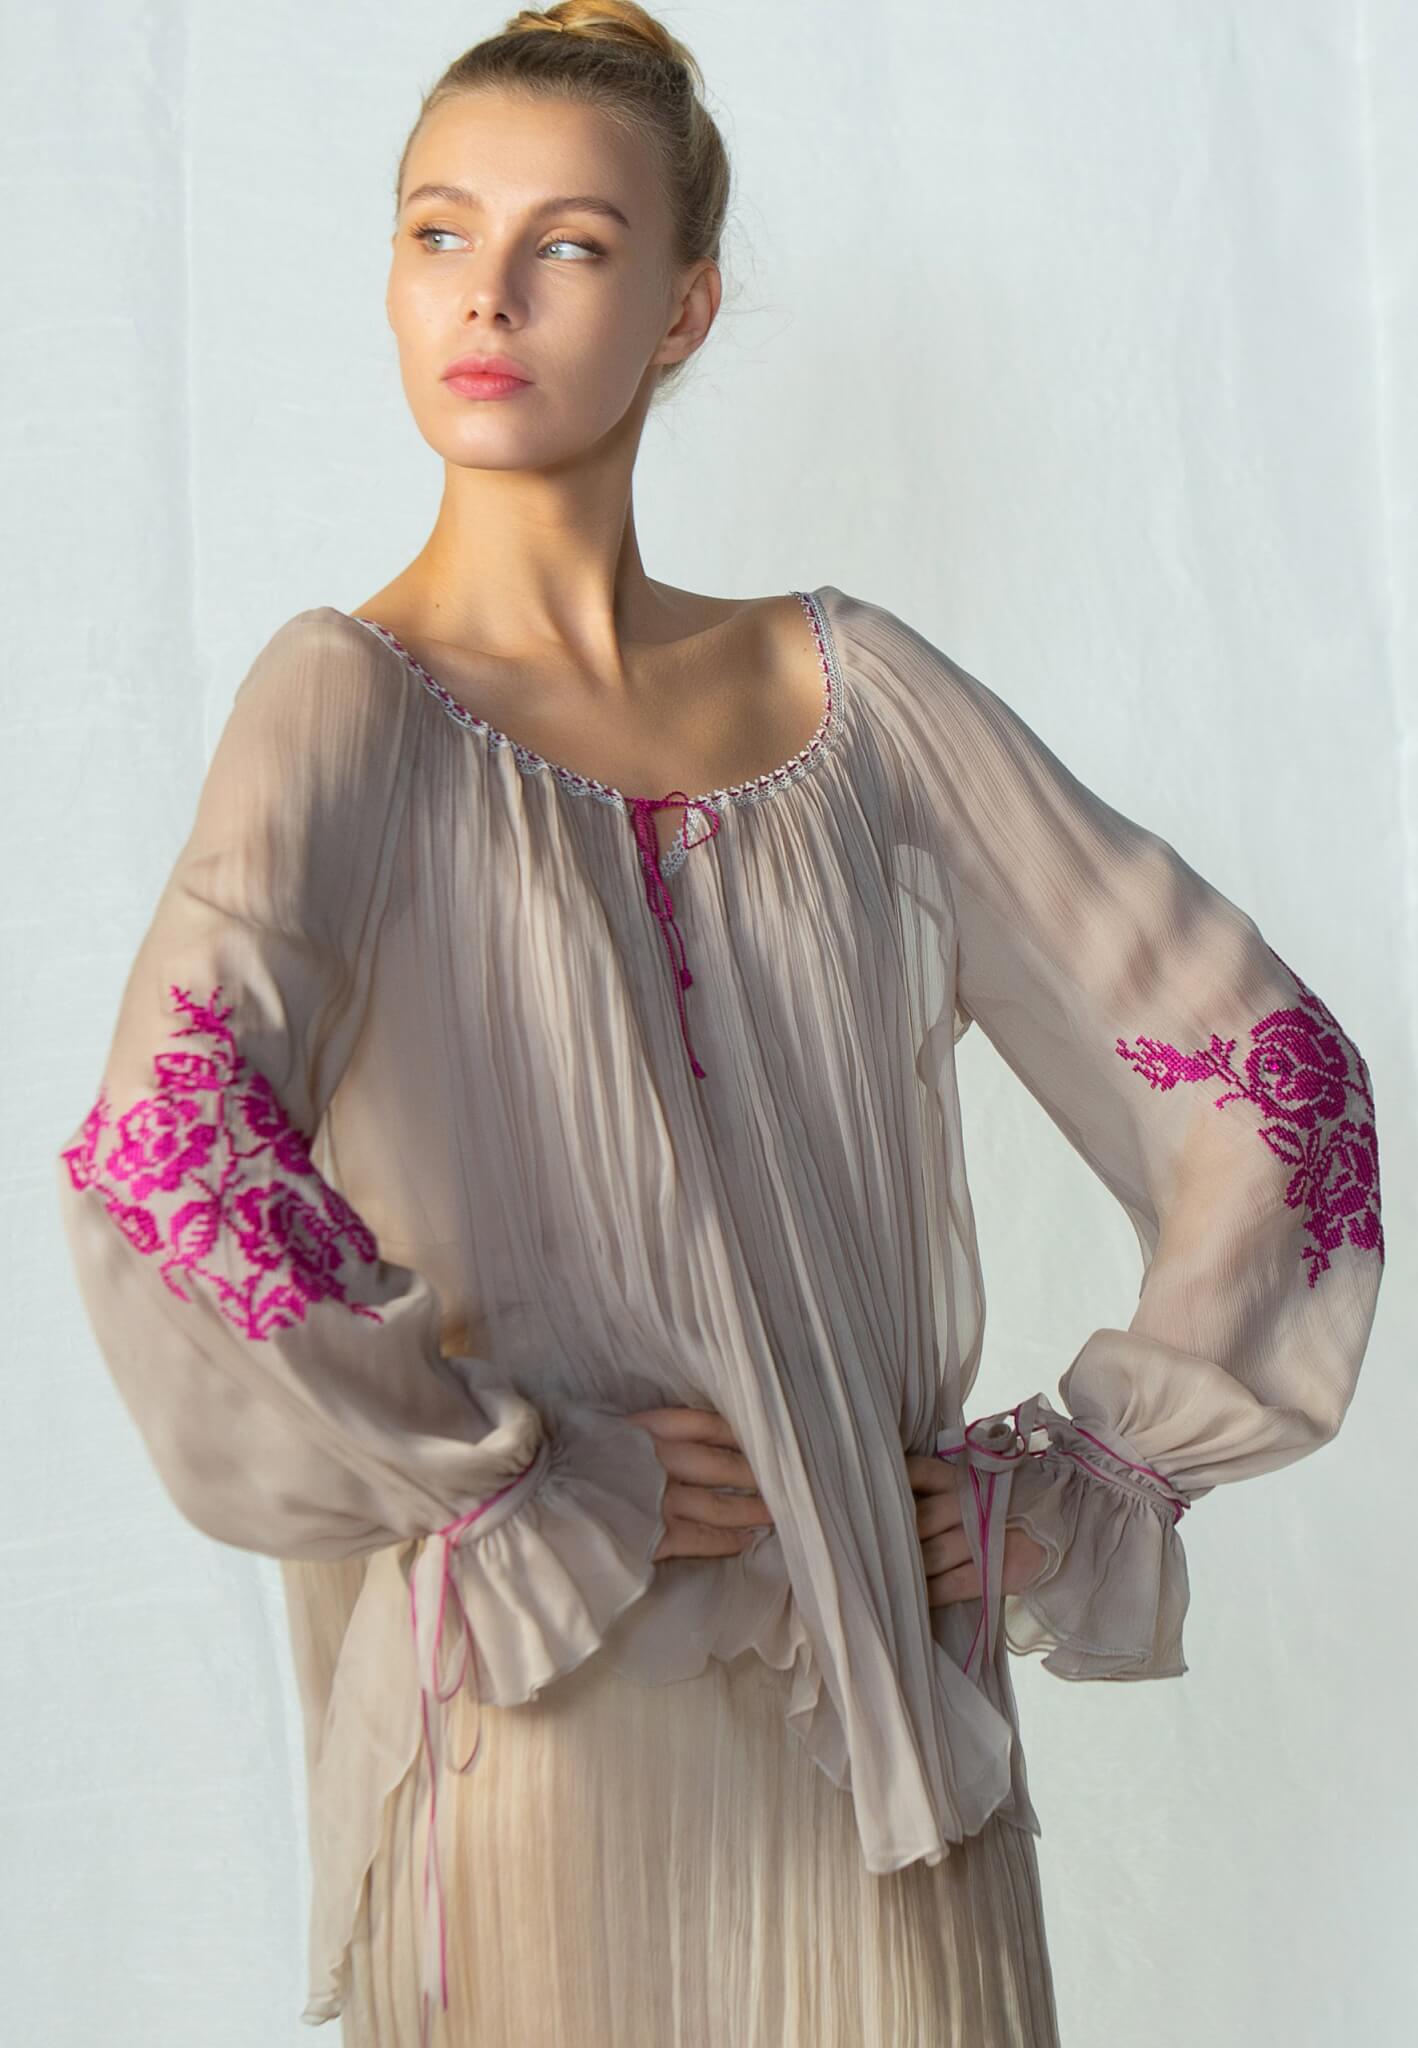 Silk blouse with lace and embroidery